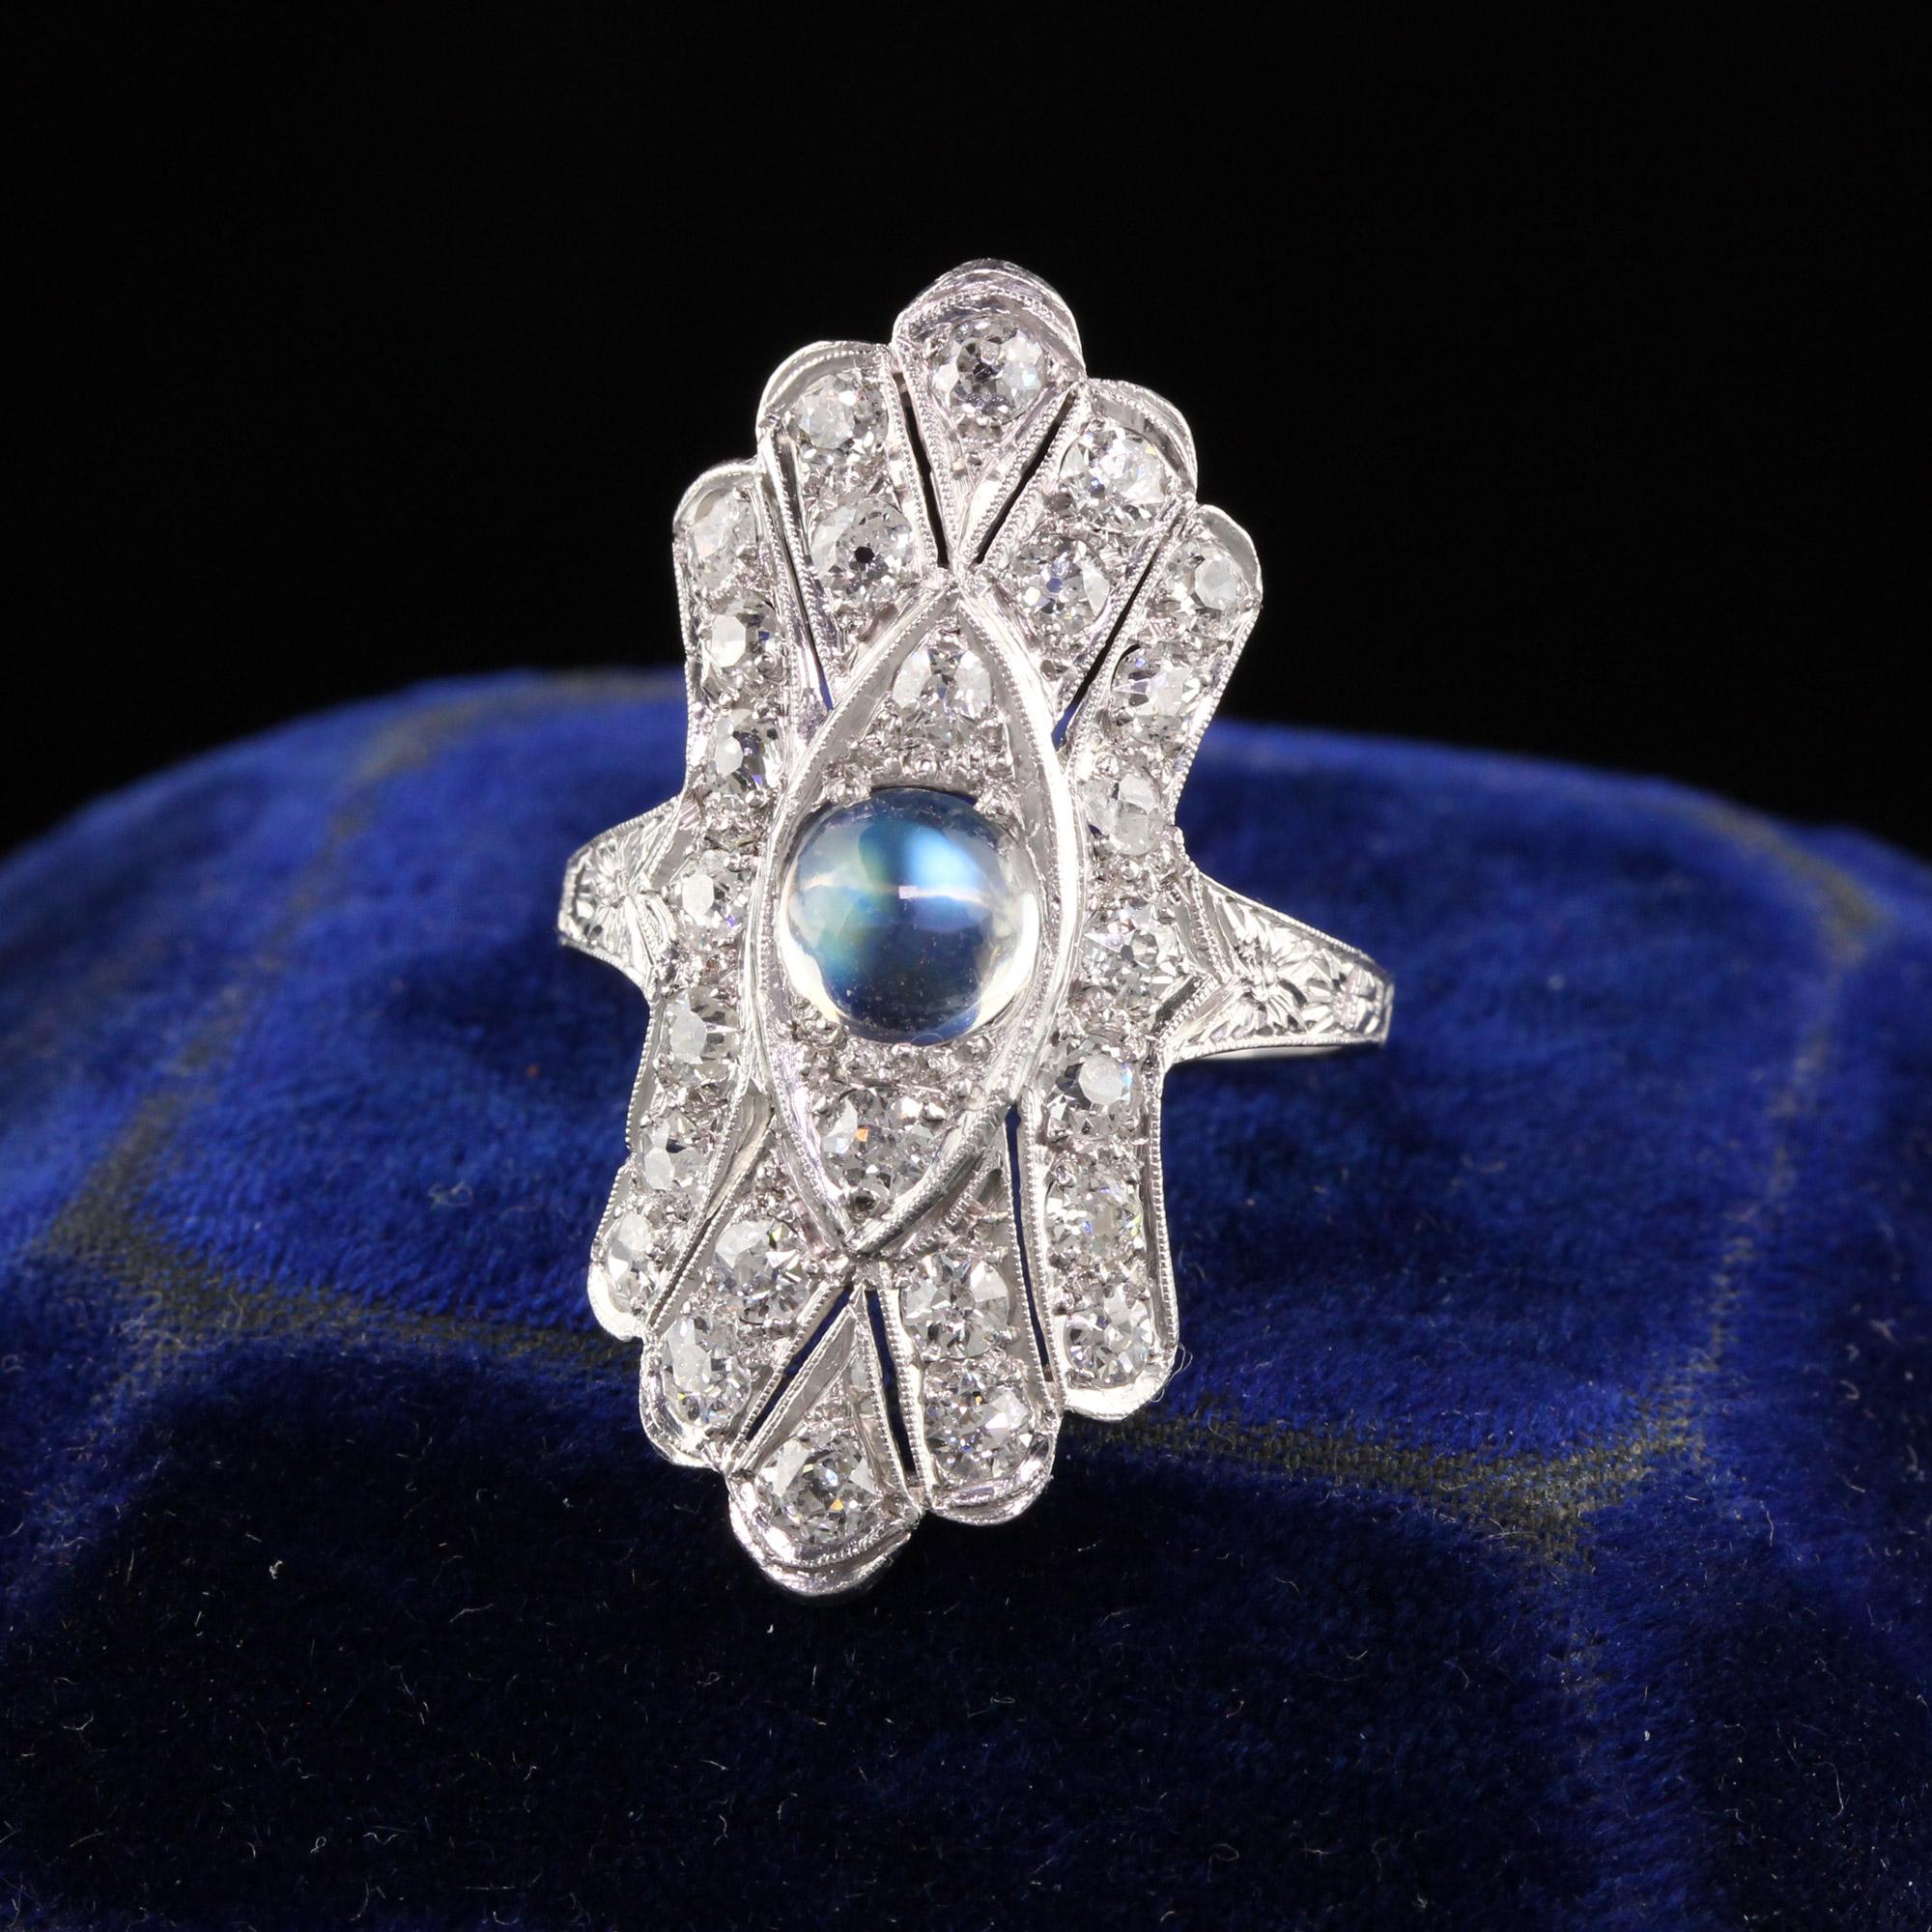 Beautiful Antique Art Deco Platinum Old European Diamond and Moonstone Shield Ring. This incredible shield ring has old european cut diamonds all over it in a gorgeous design with a bright moonstone in the center.

Item #R1006

Metal: